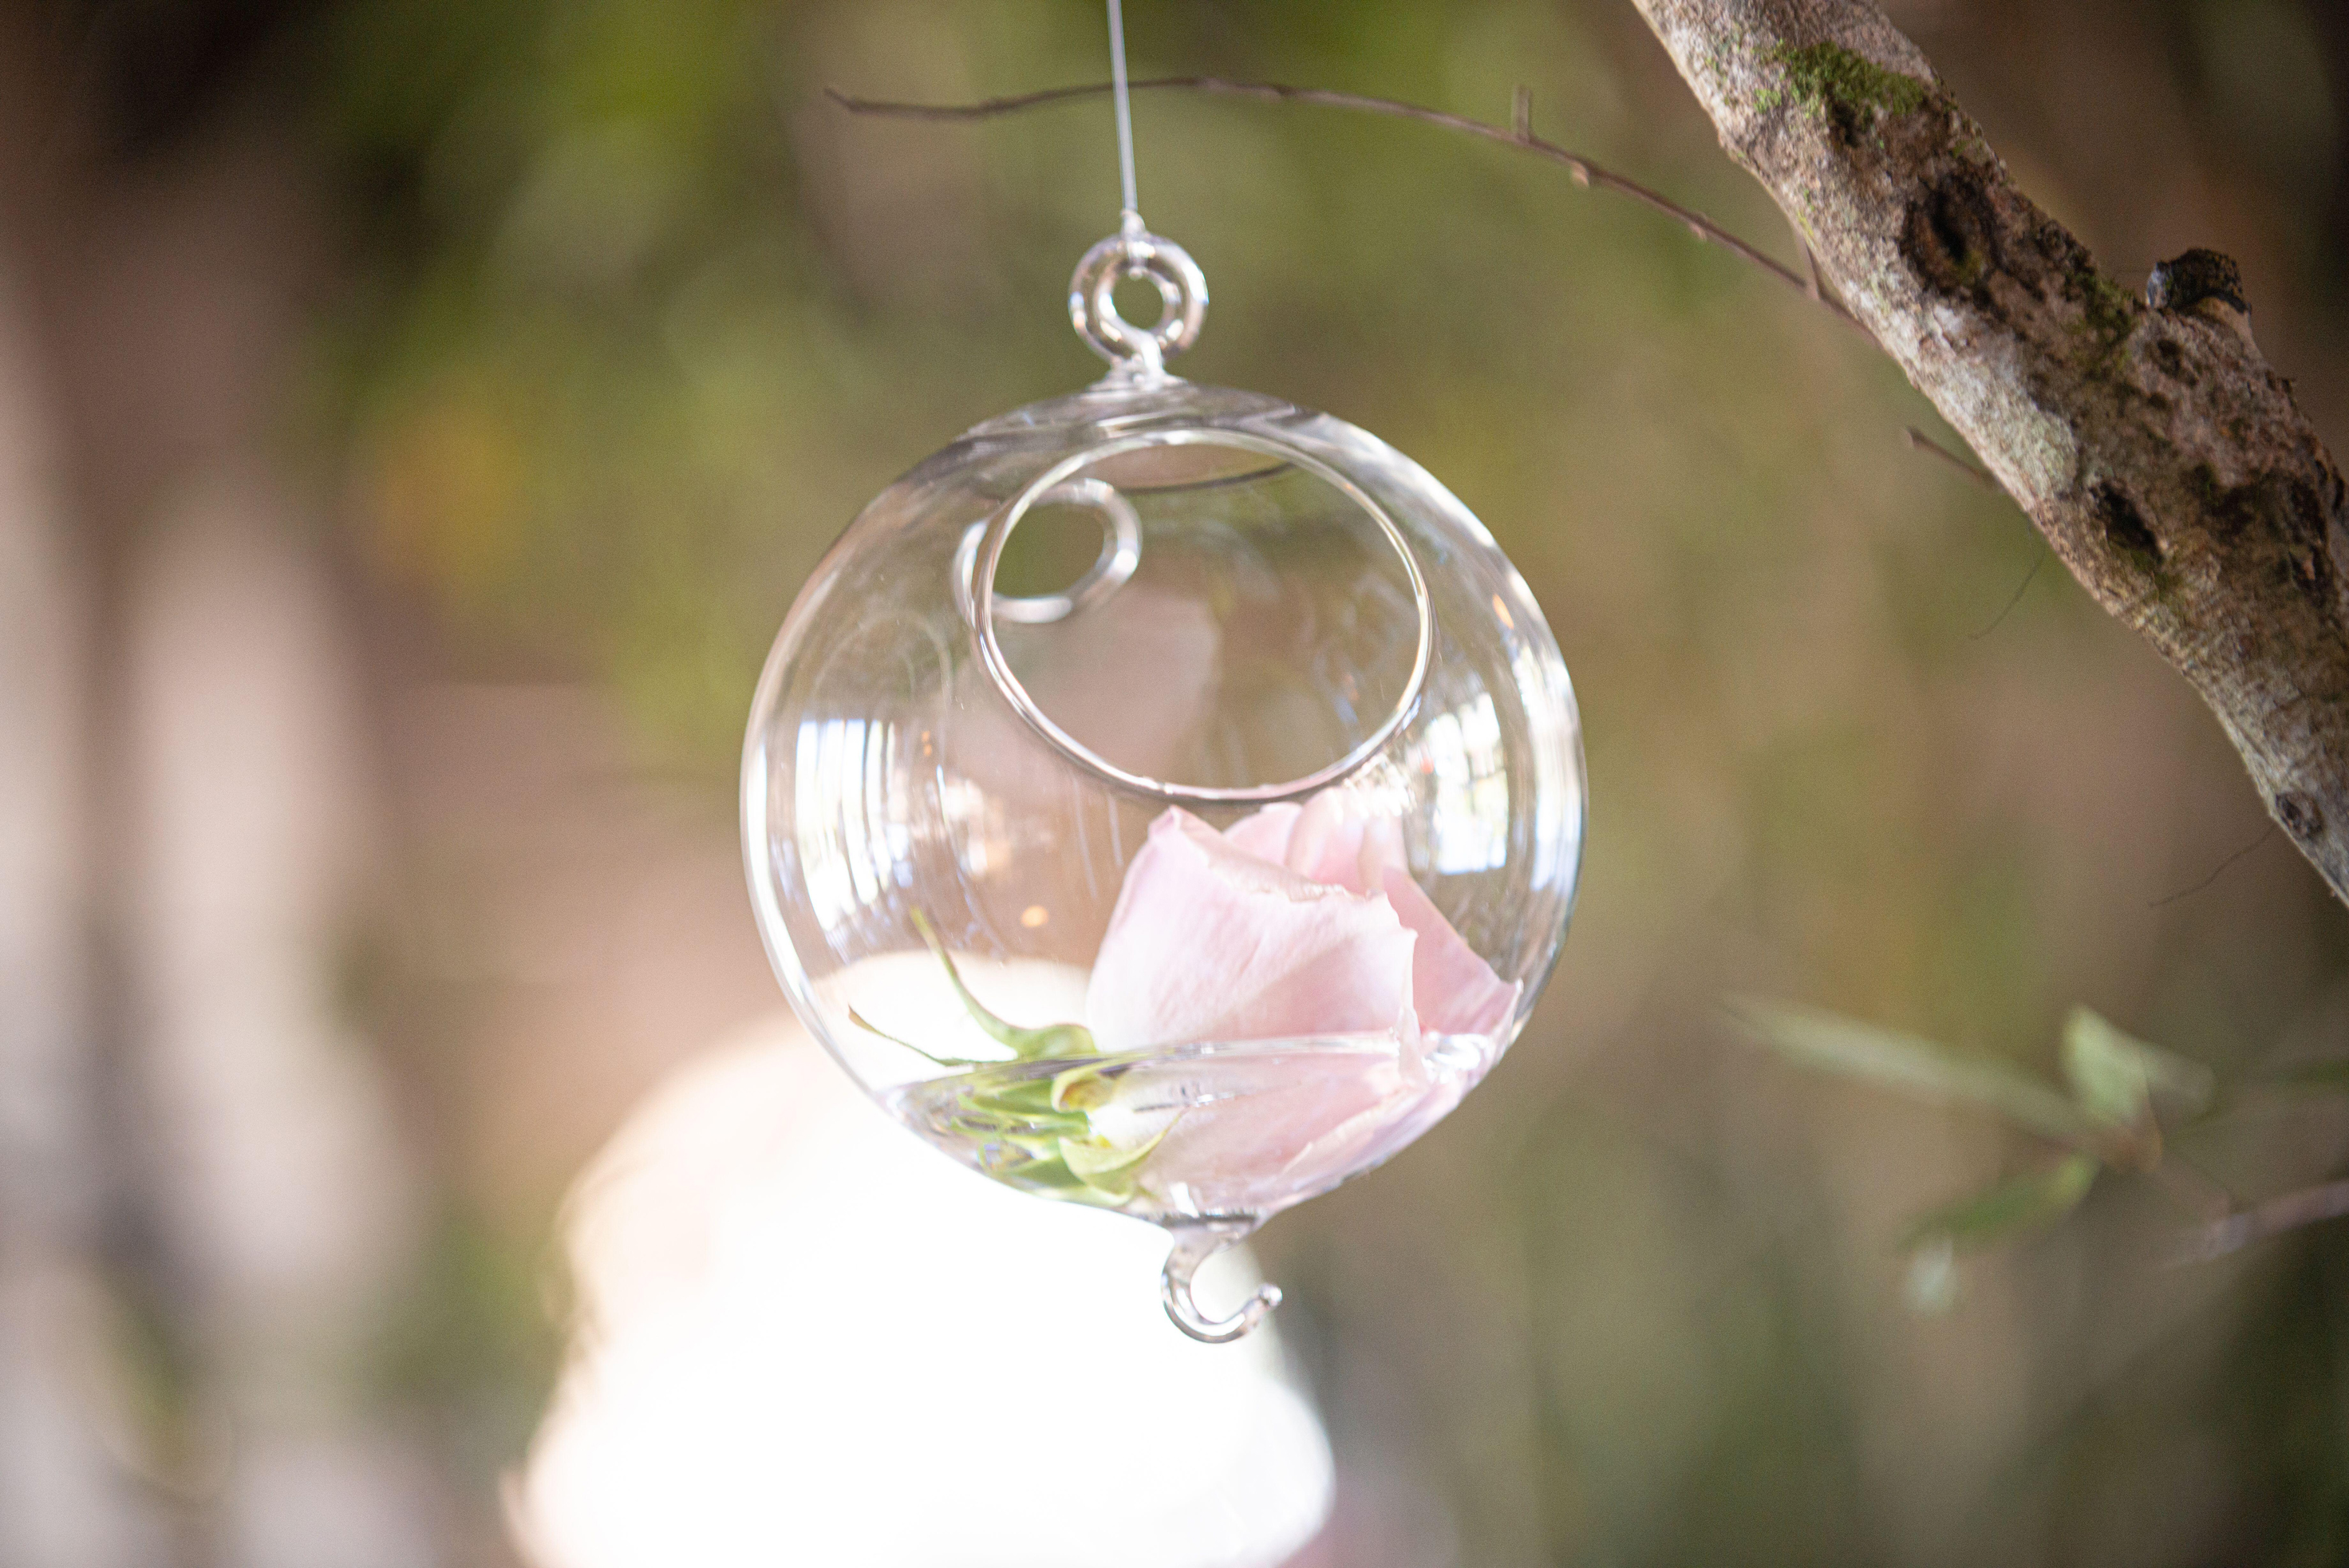 Glass bauble containing a flower (Alamy/PA)